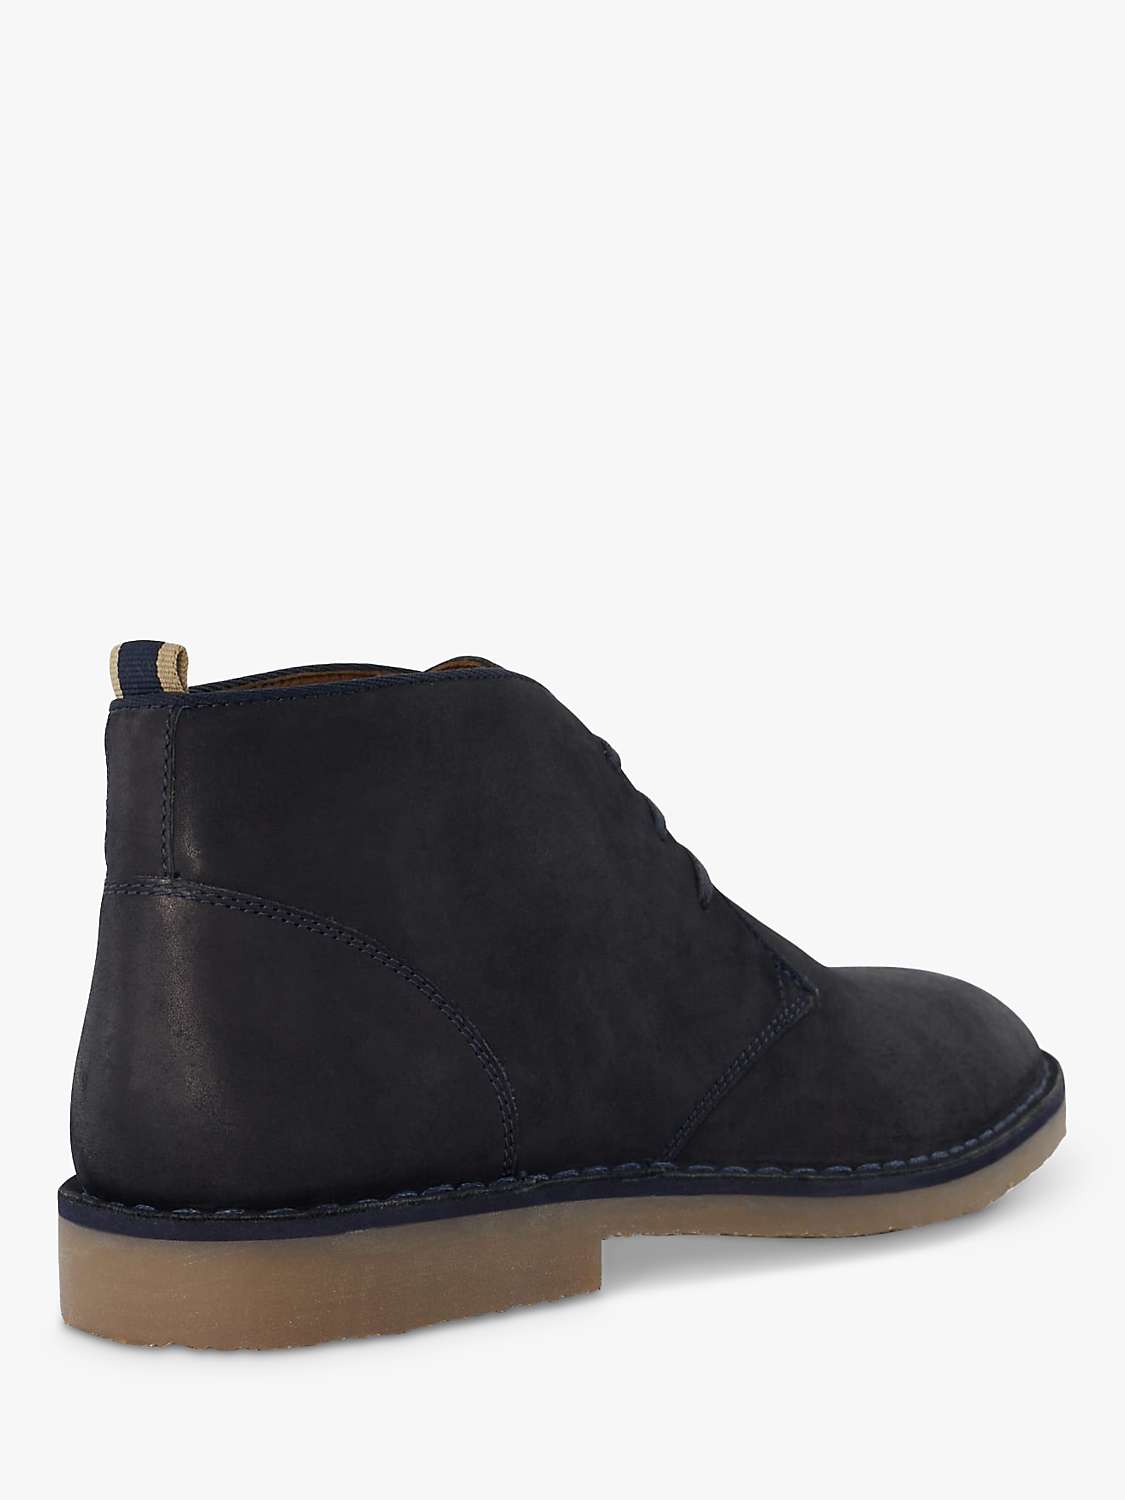 Dune Cashed Lace Up Chukka Boots, Navy at John Lewis & Partners